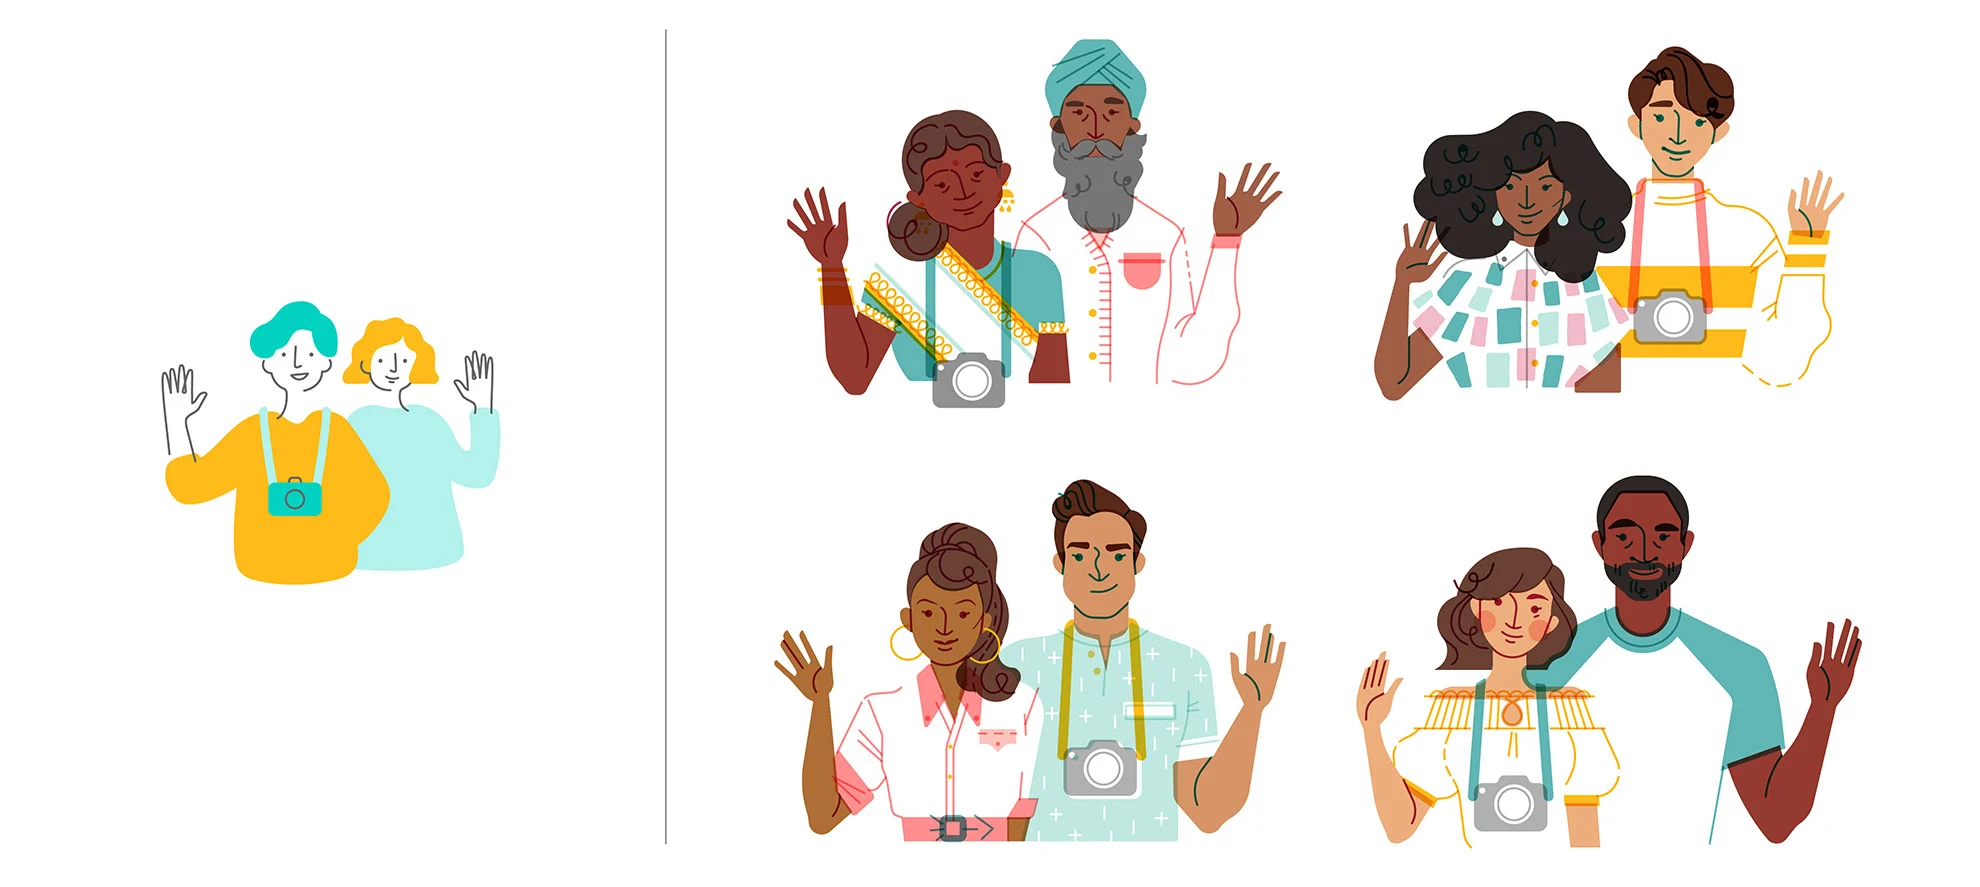 AirBnB inclusive artwork showing diversity